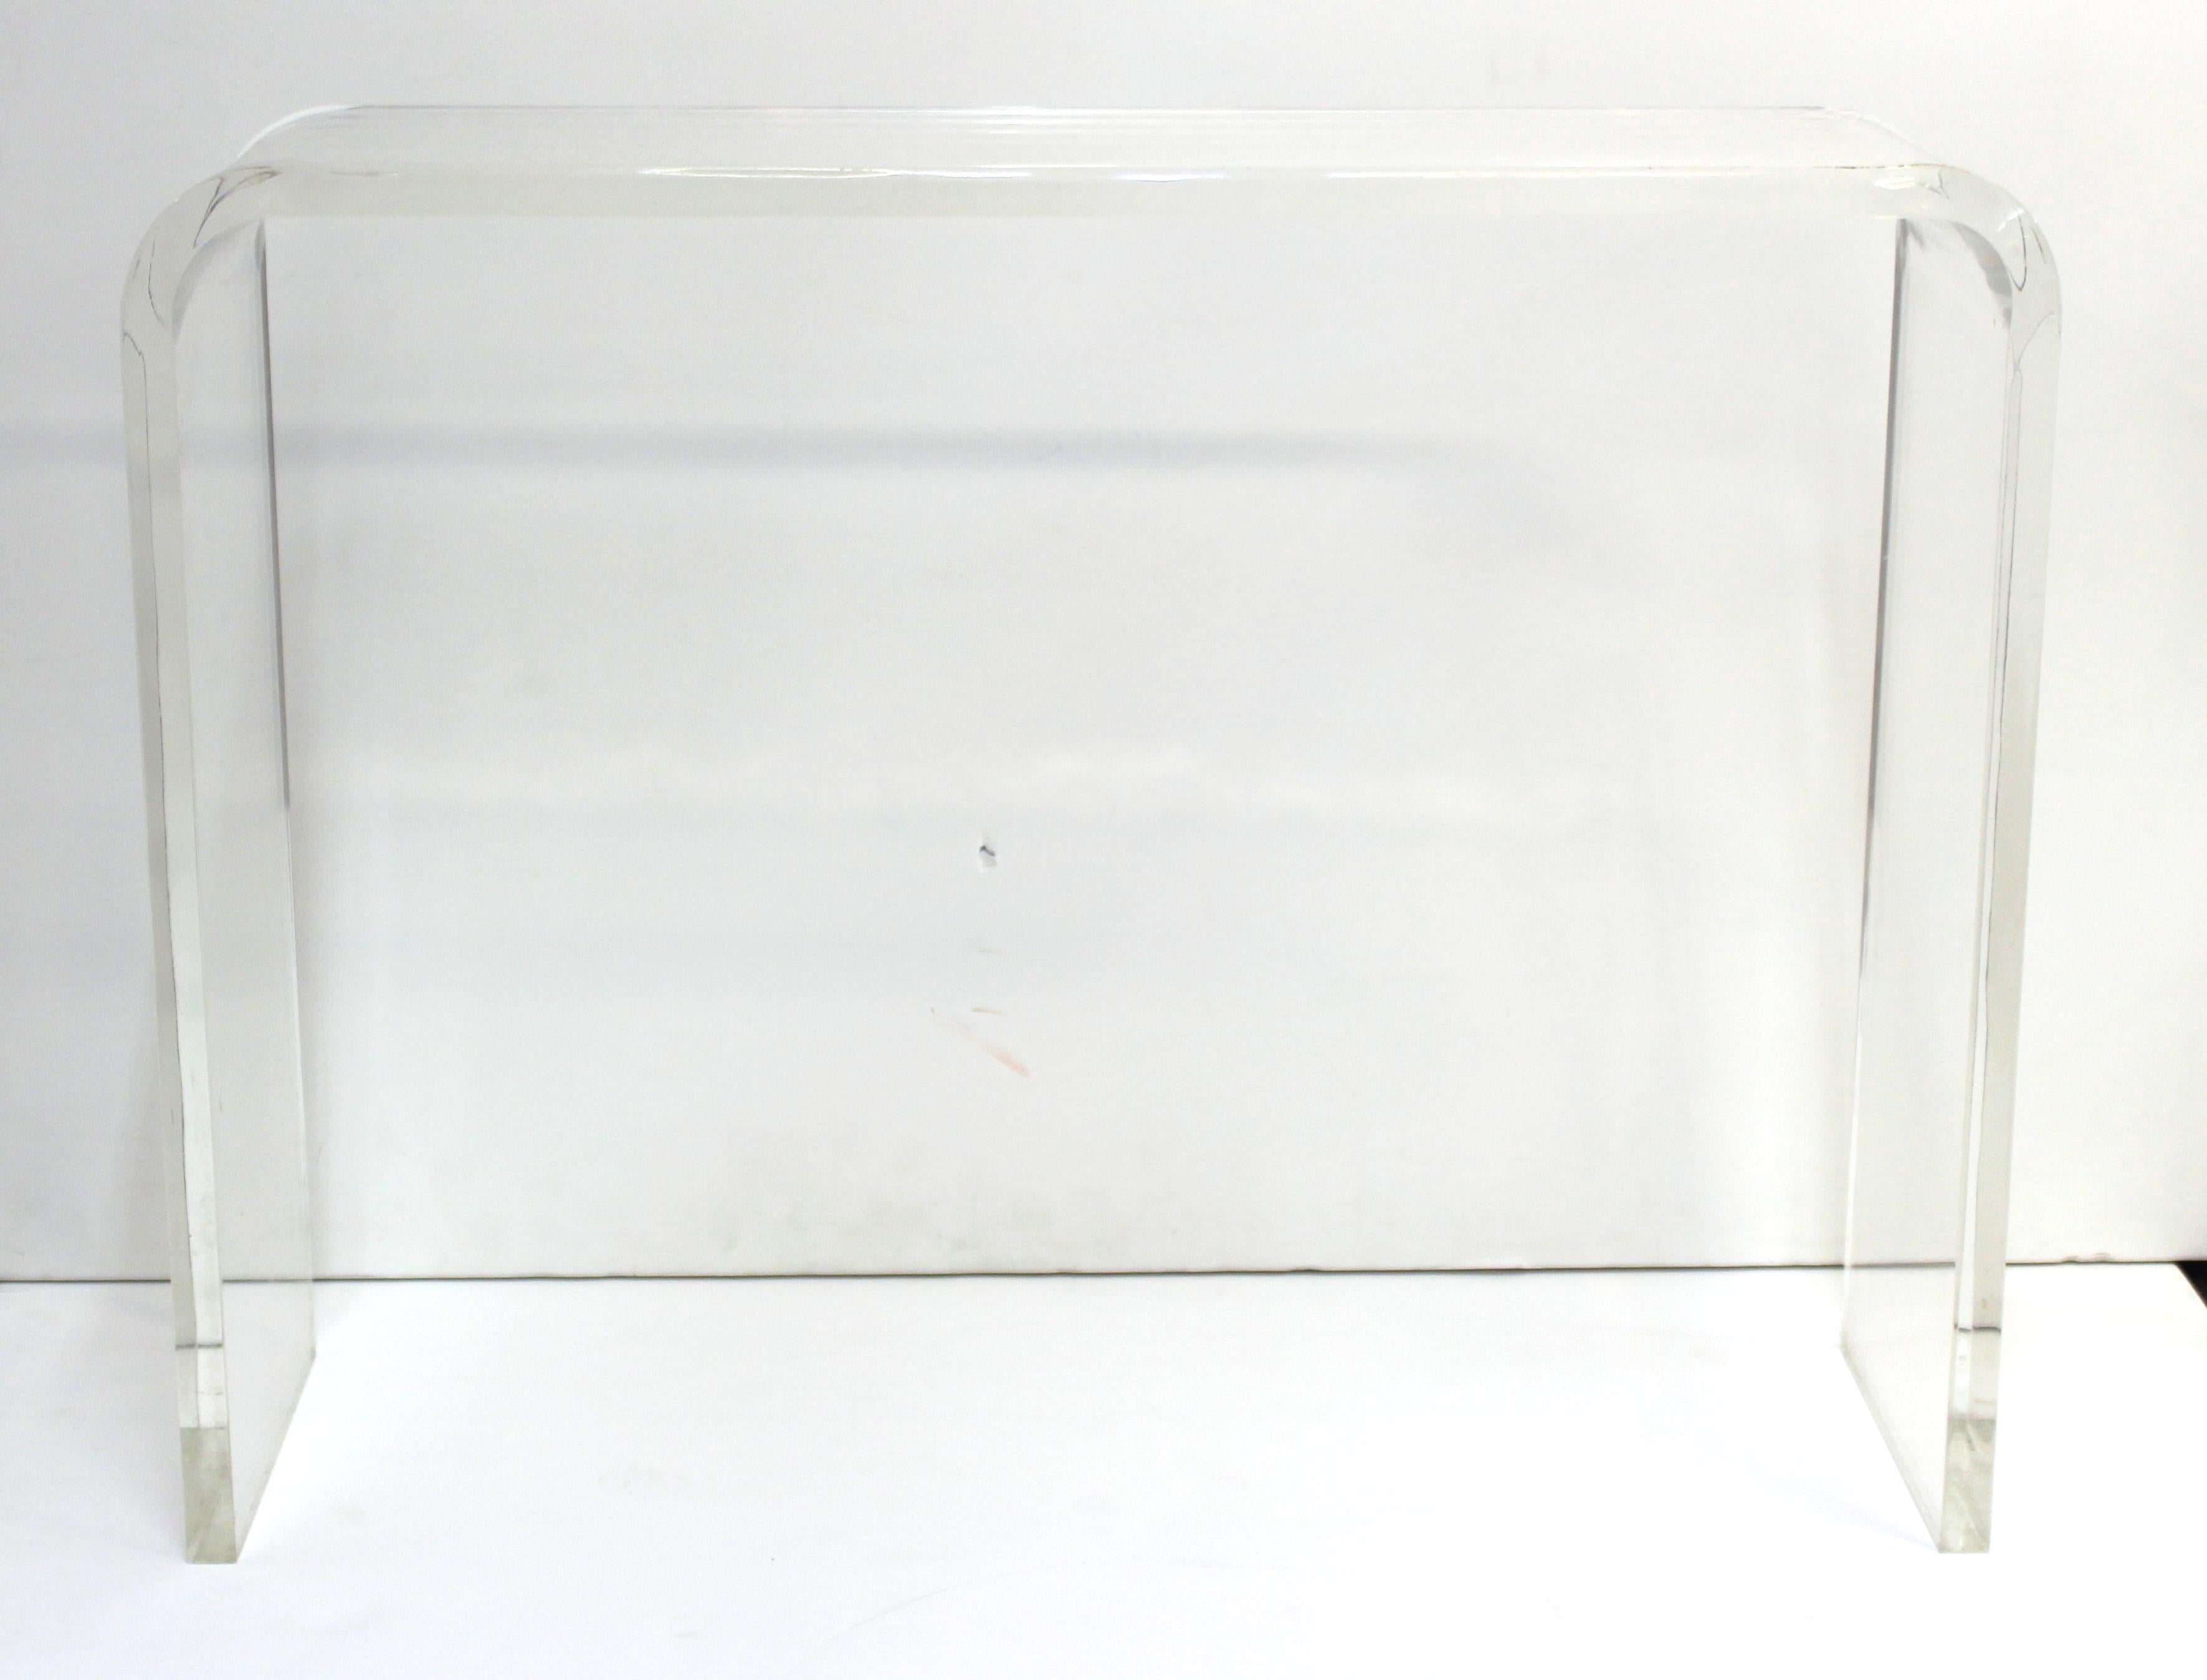 Modern waterfall console table made of clear and thick Lucite. The piece was likely made during the 1970s and is in great vintage condition with age-appropriate wear.